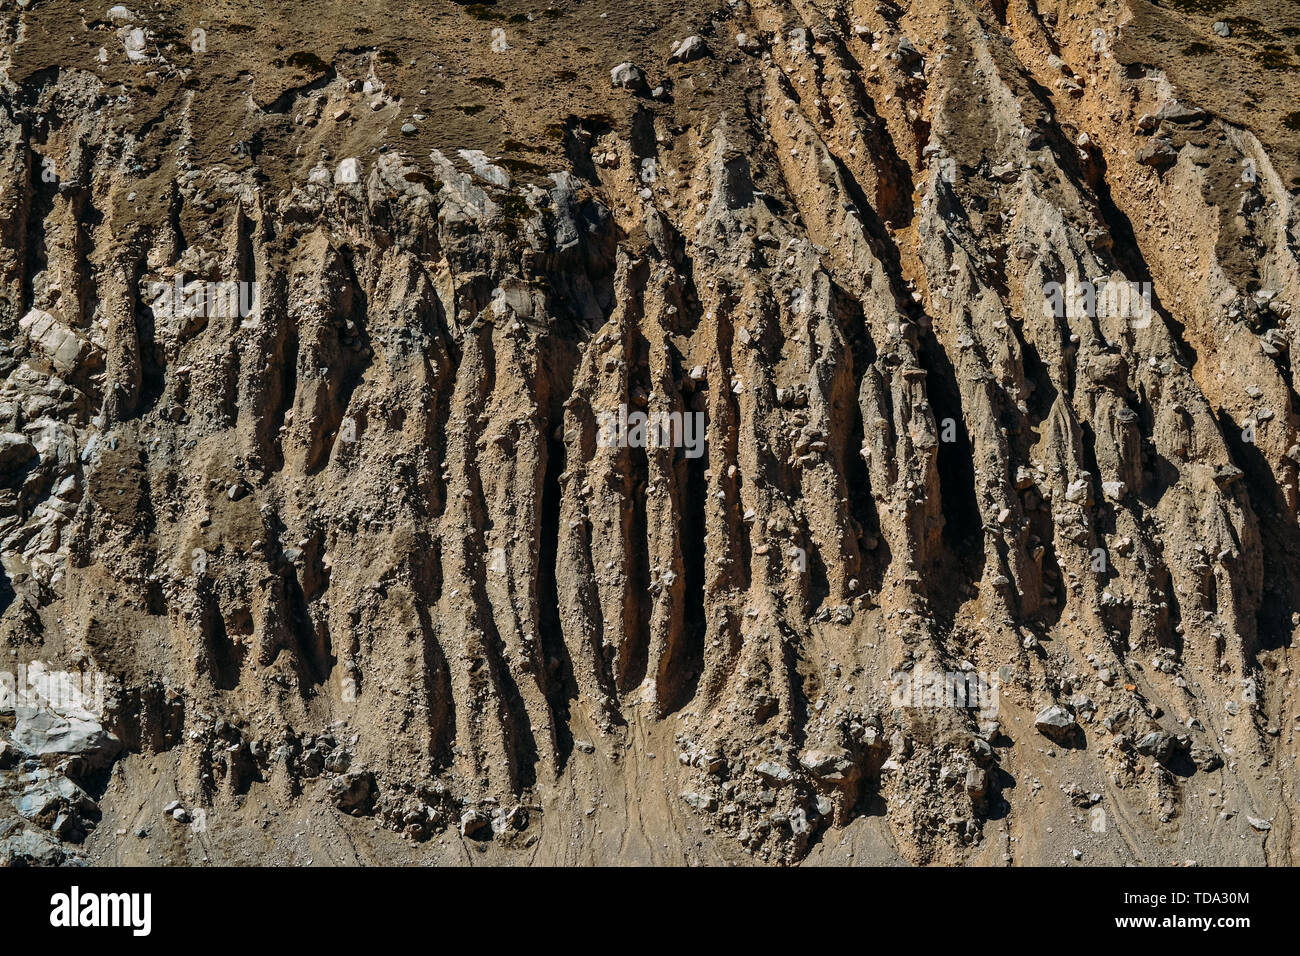 landscape and texture of rock rocks in the rocky terrain Stock Photo